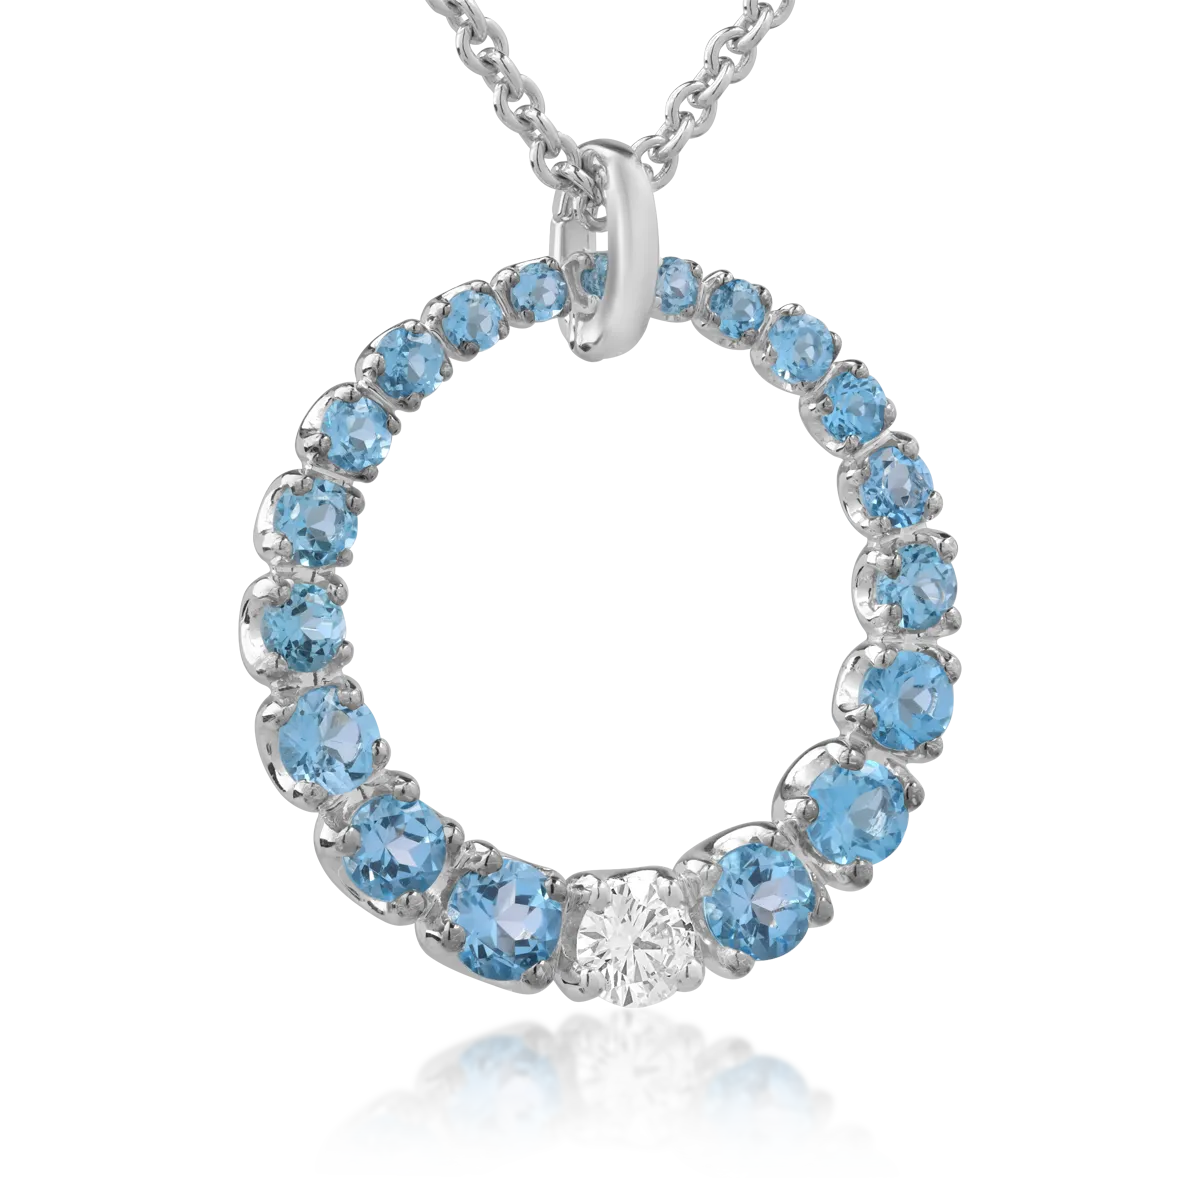 18K white gold pendant necklace with 0.59ct diamond and 4.92ct blue topaz